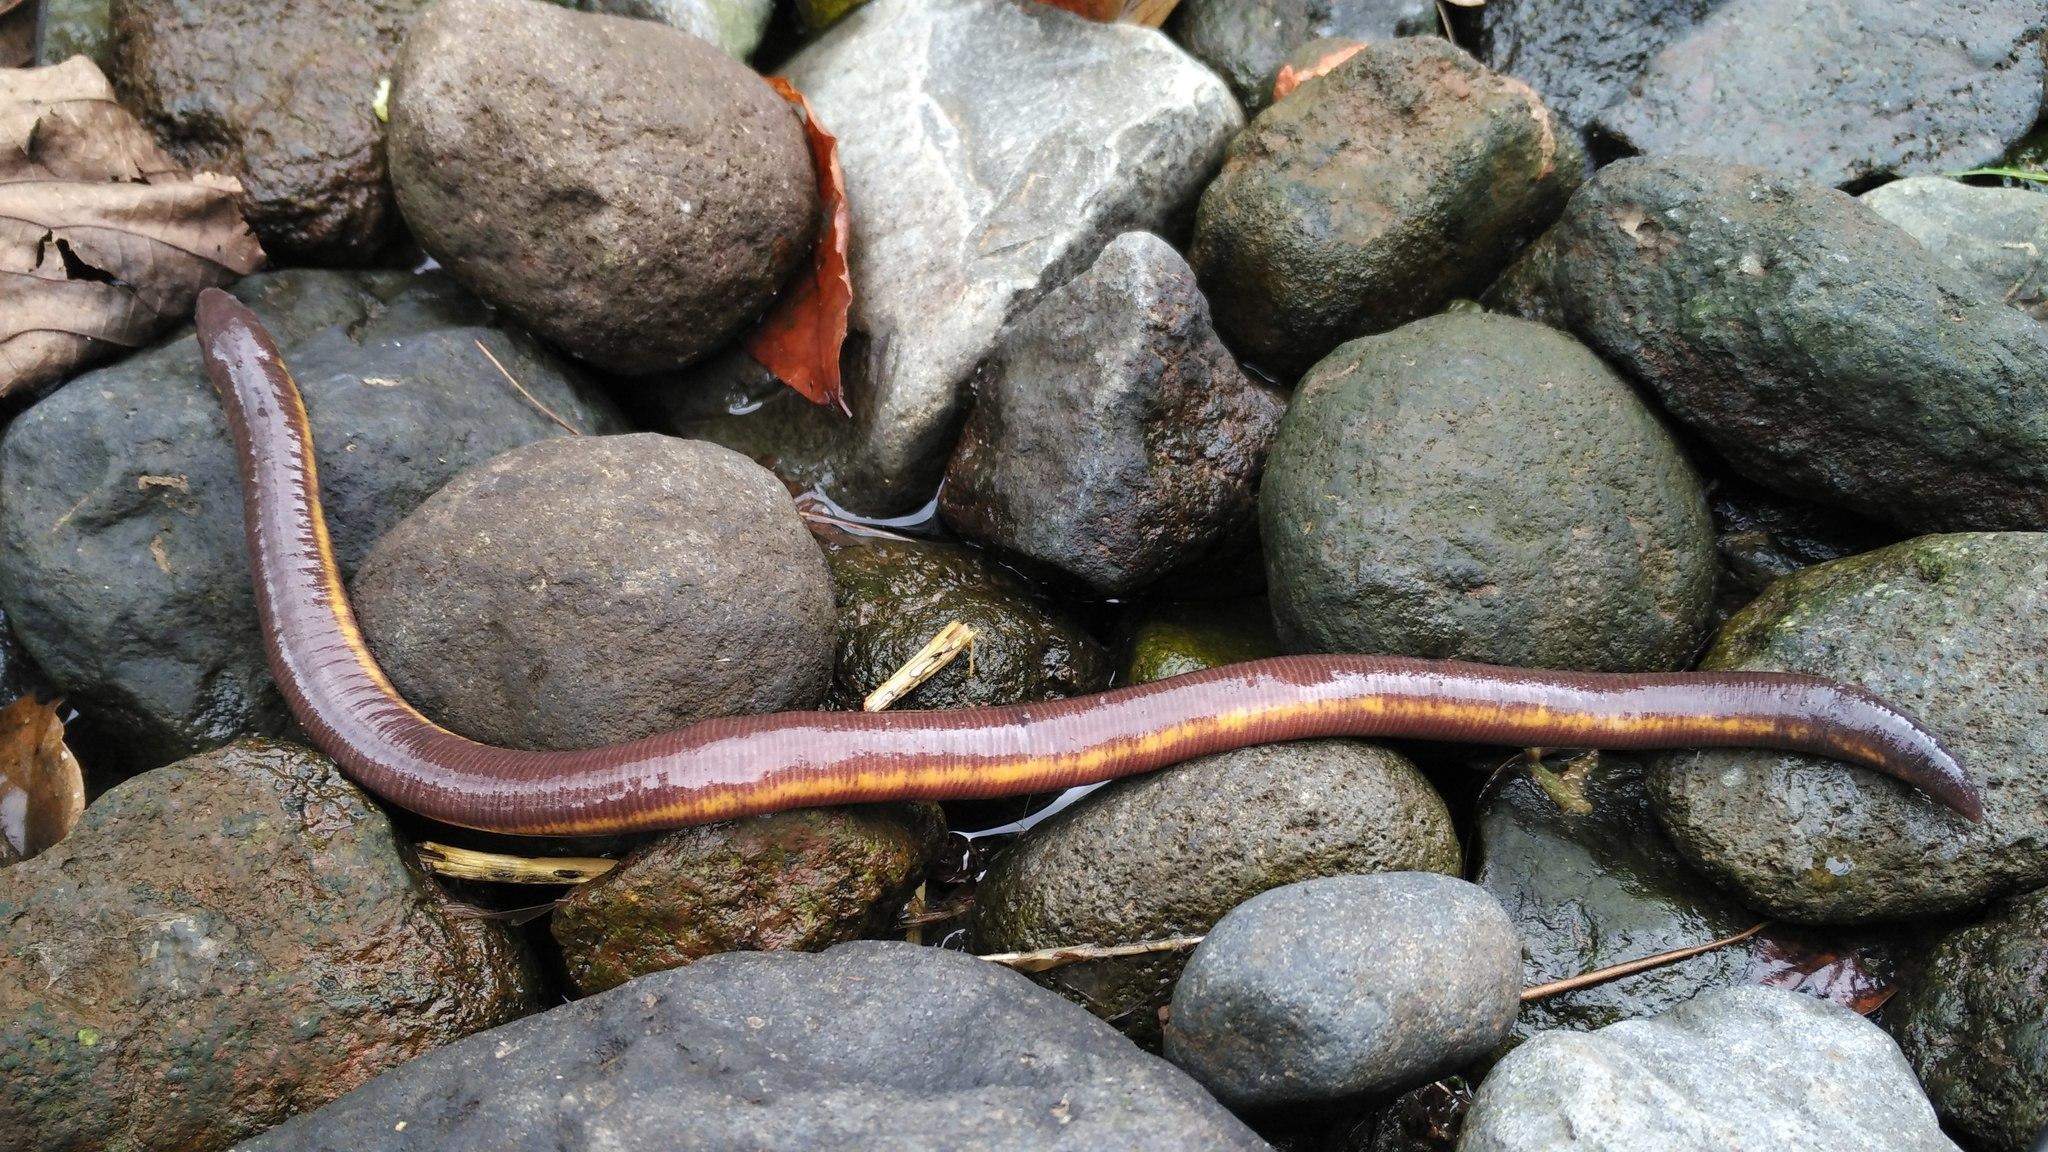 Caecilians Wallpaper For Ipad, Amphibians Wallpapers, Animal